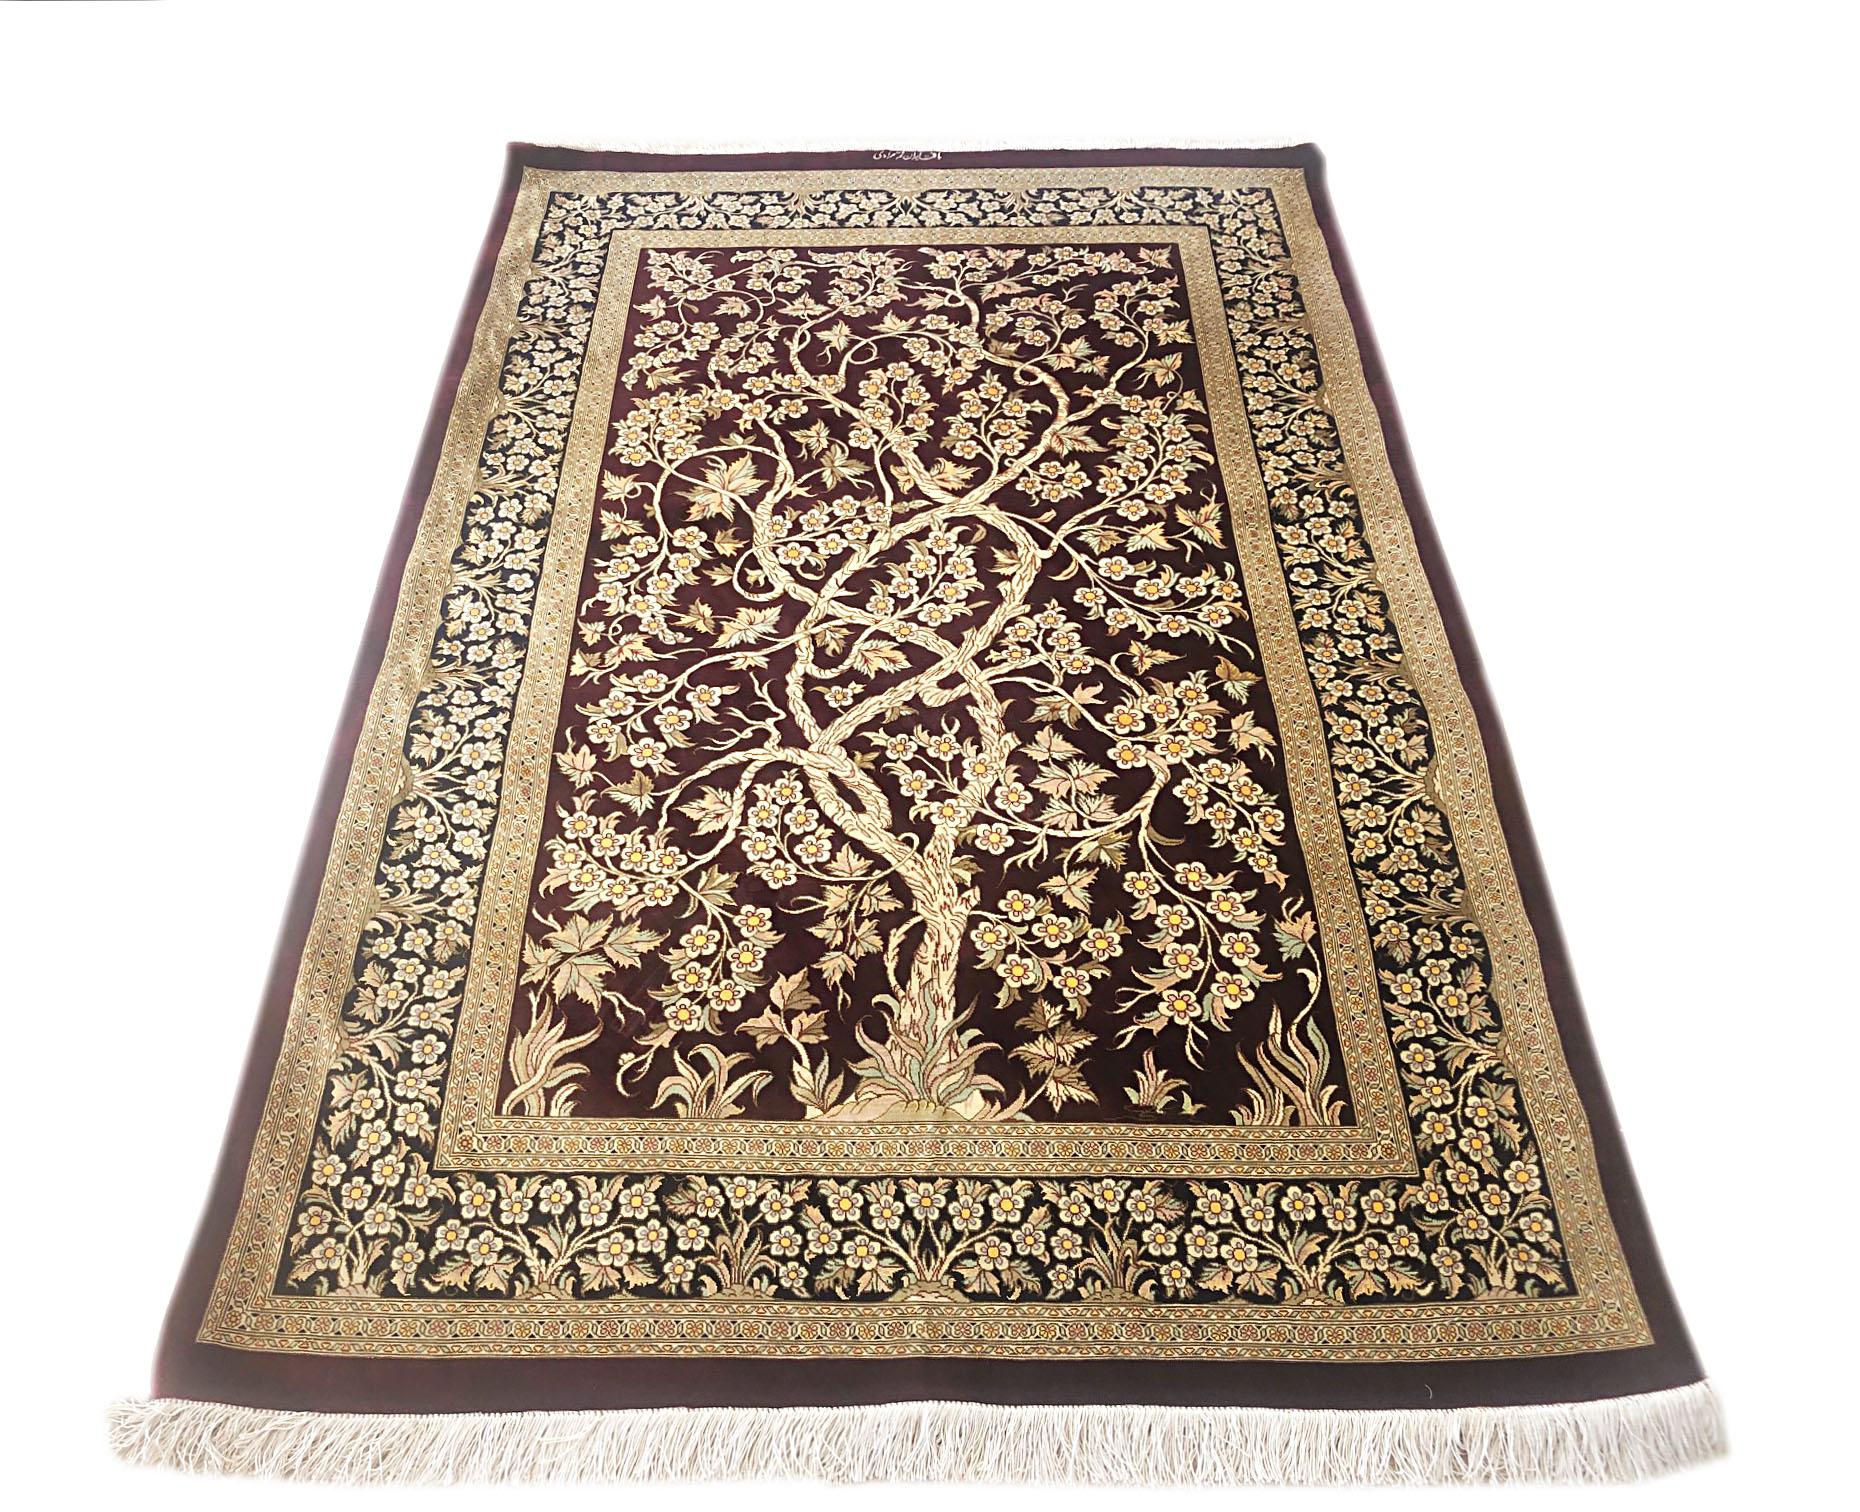 This is an extremely fine rug is weaved in city of Qum, Iran. This rug has silk pile and foundation, with a dramatic tree of life design woven onto a burgundy background with a dark blue border. The tree of life is a popular element in many vintage